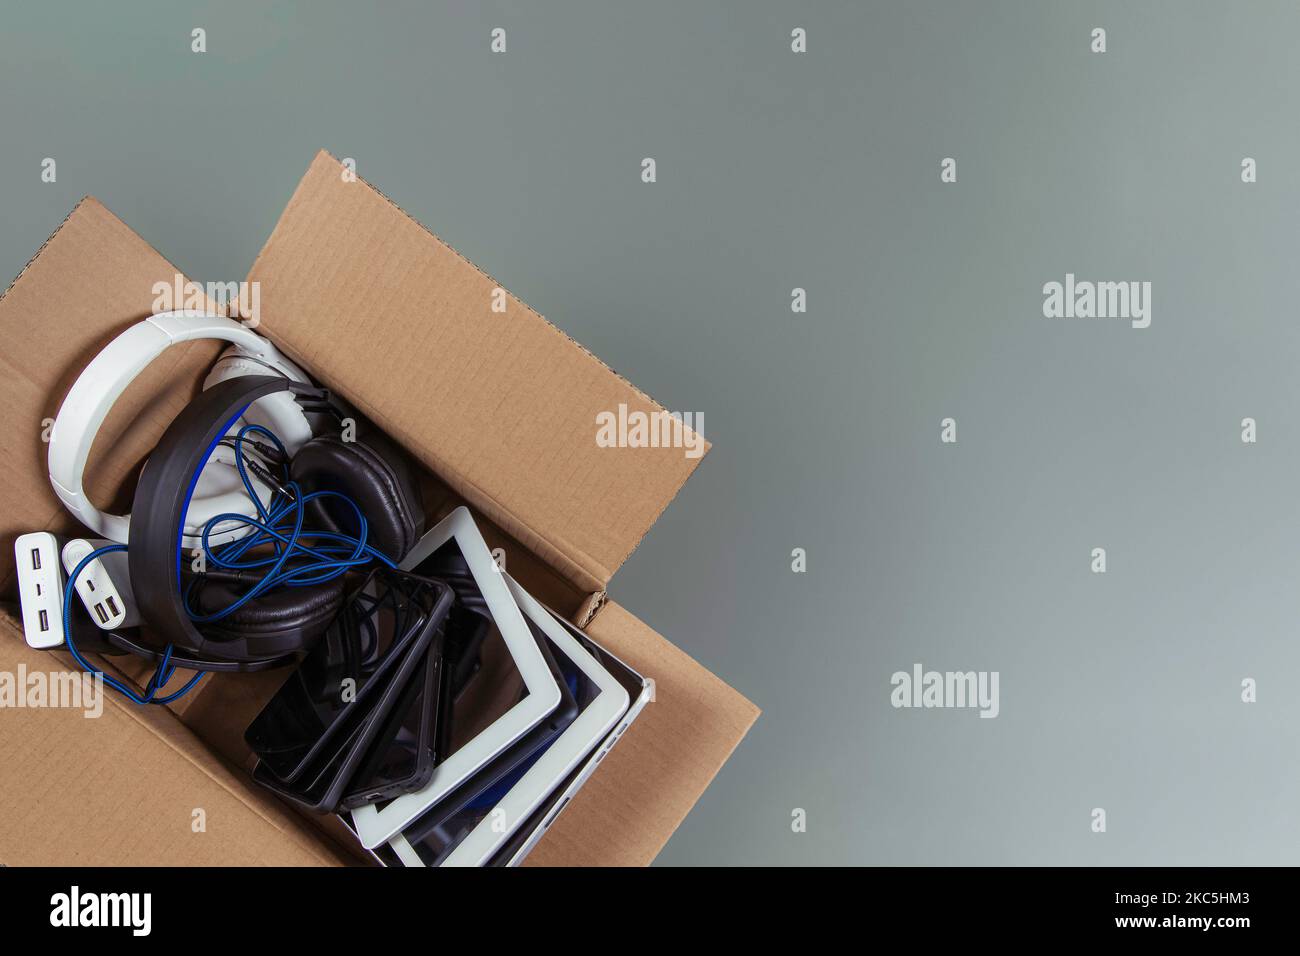 Cardboard box full of old used computers, digital tablets, smartphones, electronic gadgets for recycling on gray background. Donation, e-waste Stock Photo